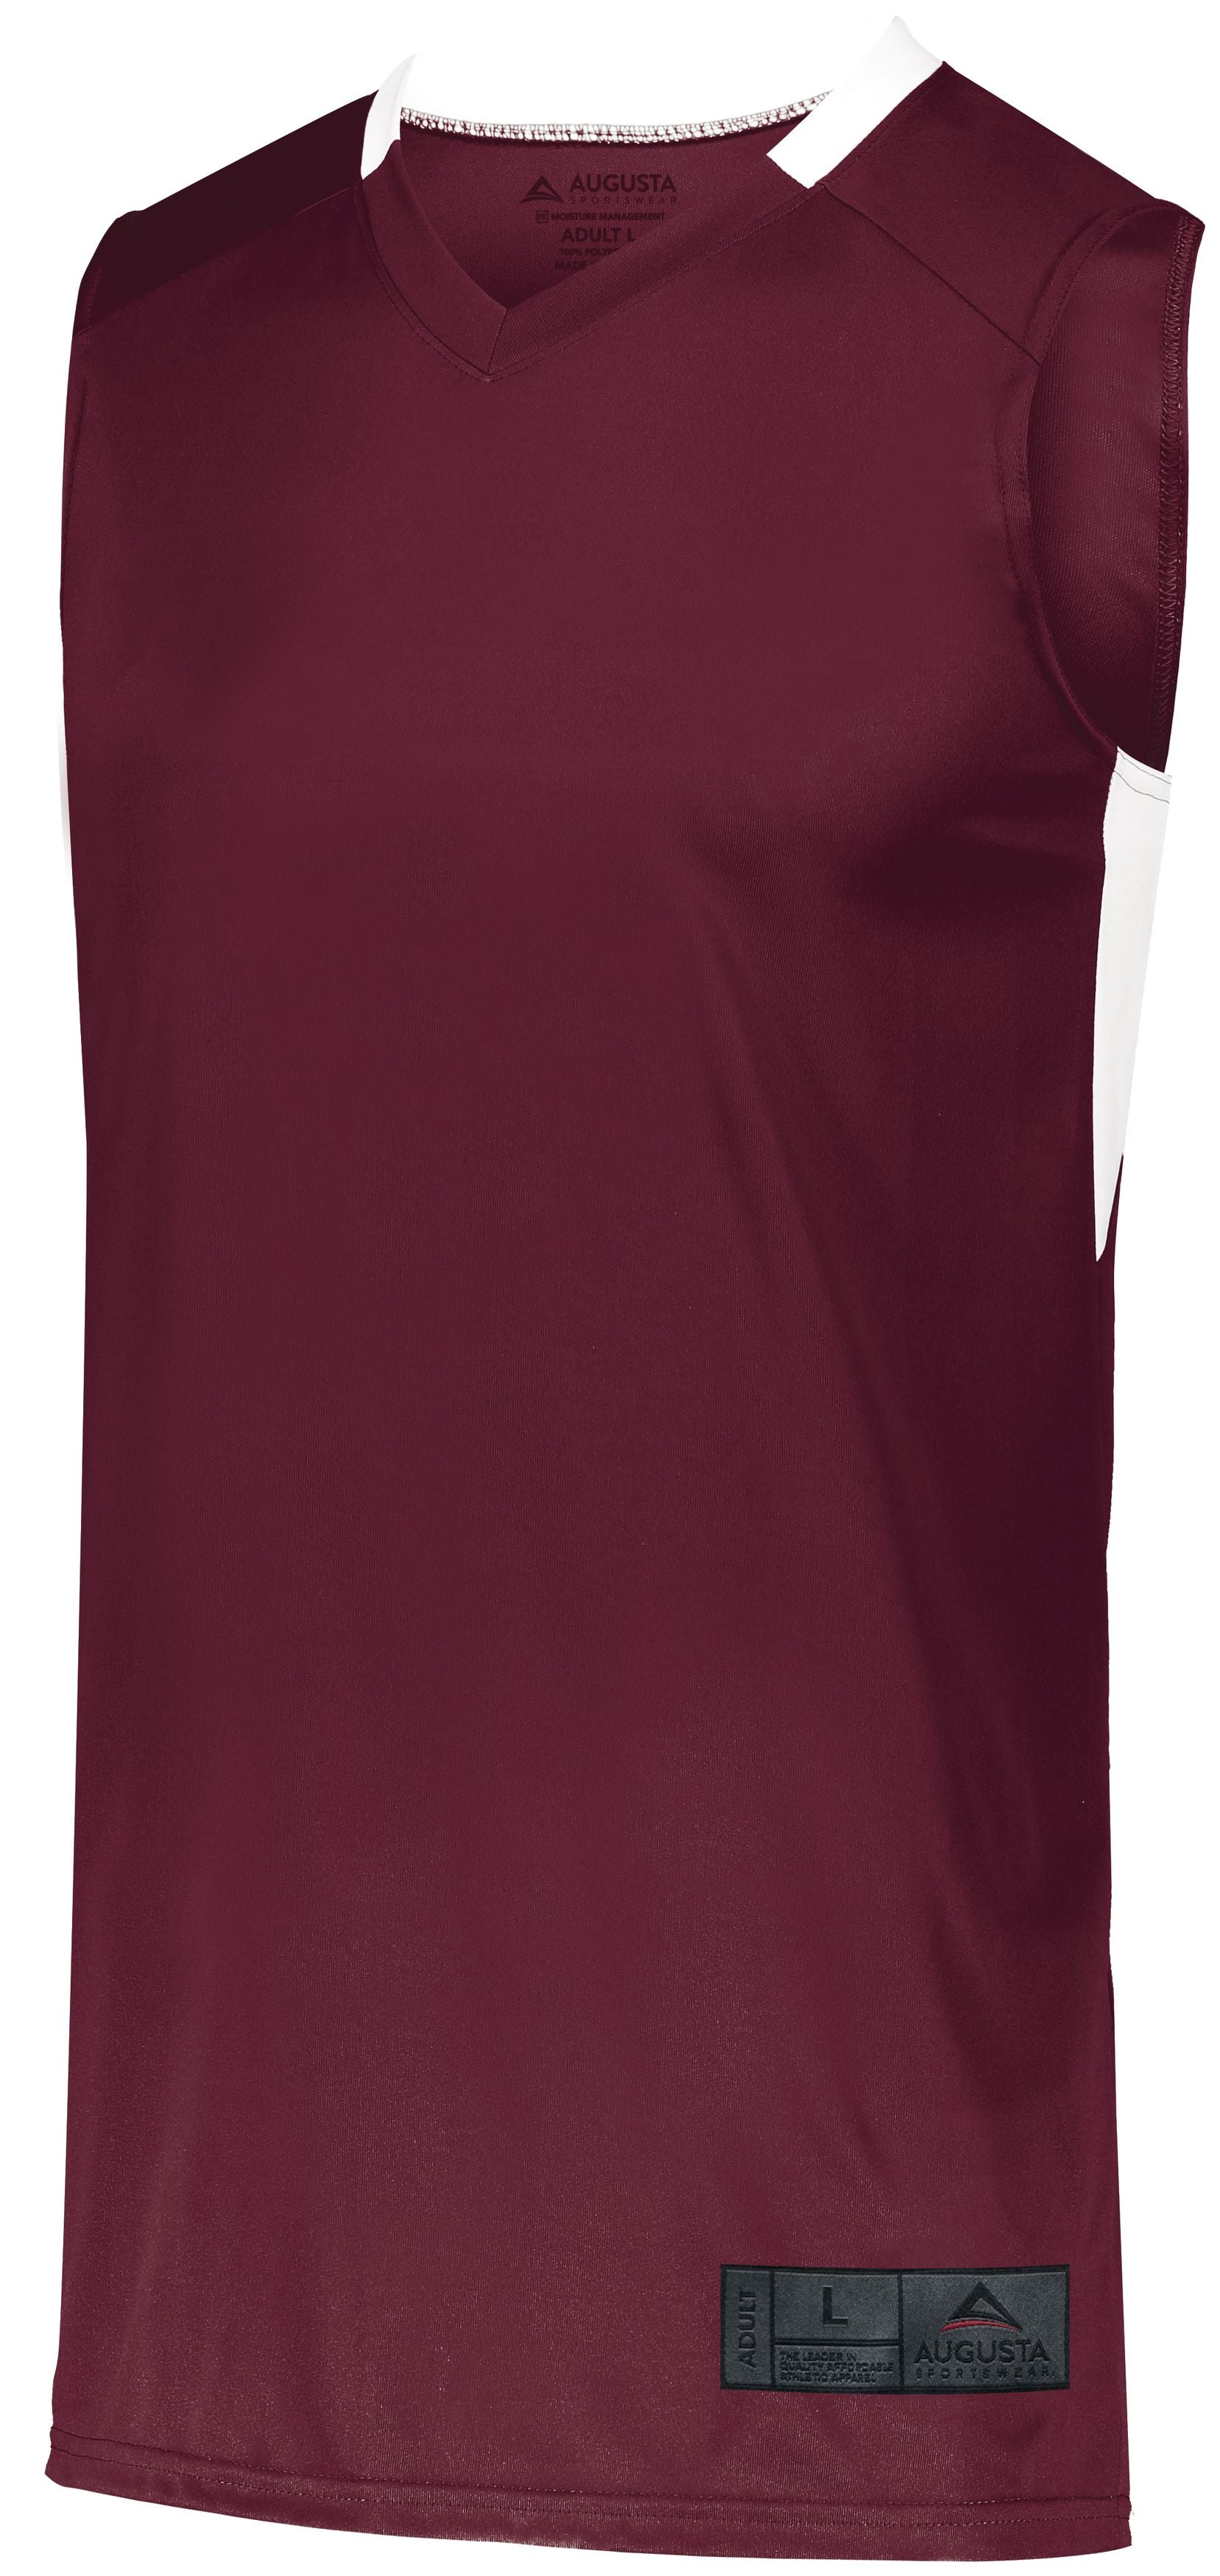 Augusta Sportswear Youth Step-Back Basketball Jersey in Maroon/White  -Part of the Youth, Youth-Jersey, Augusta-Products, Basketball, Shirts, All-Sports, All-Sports-1 product lines at KanaleyCreations.com